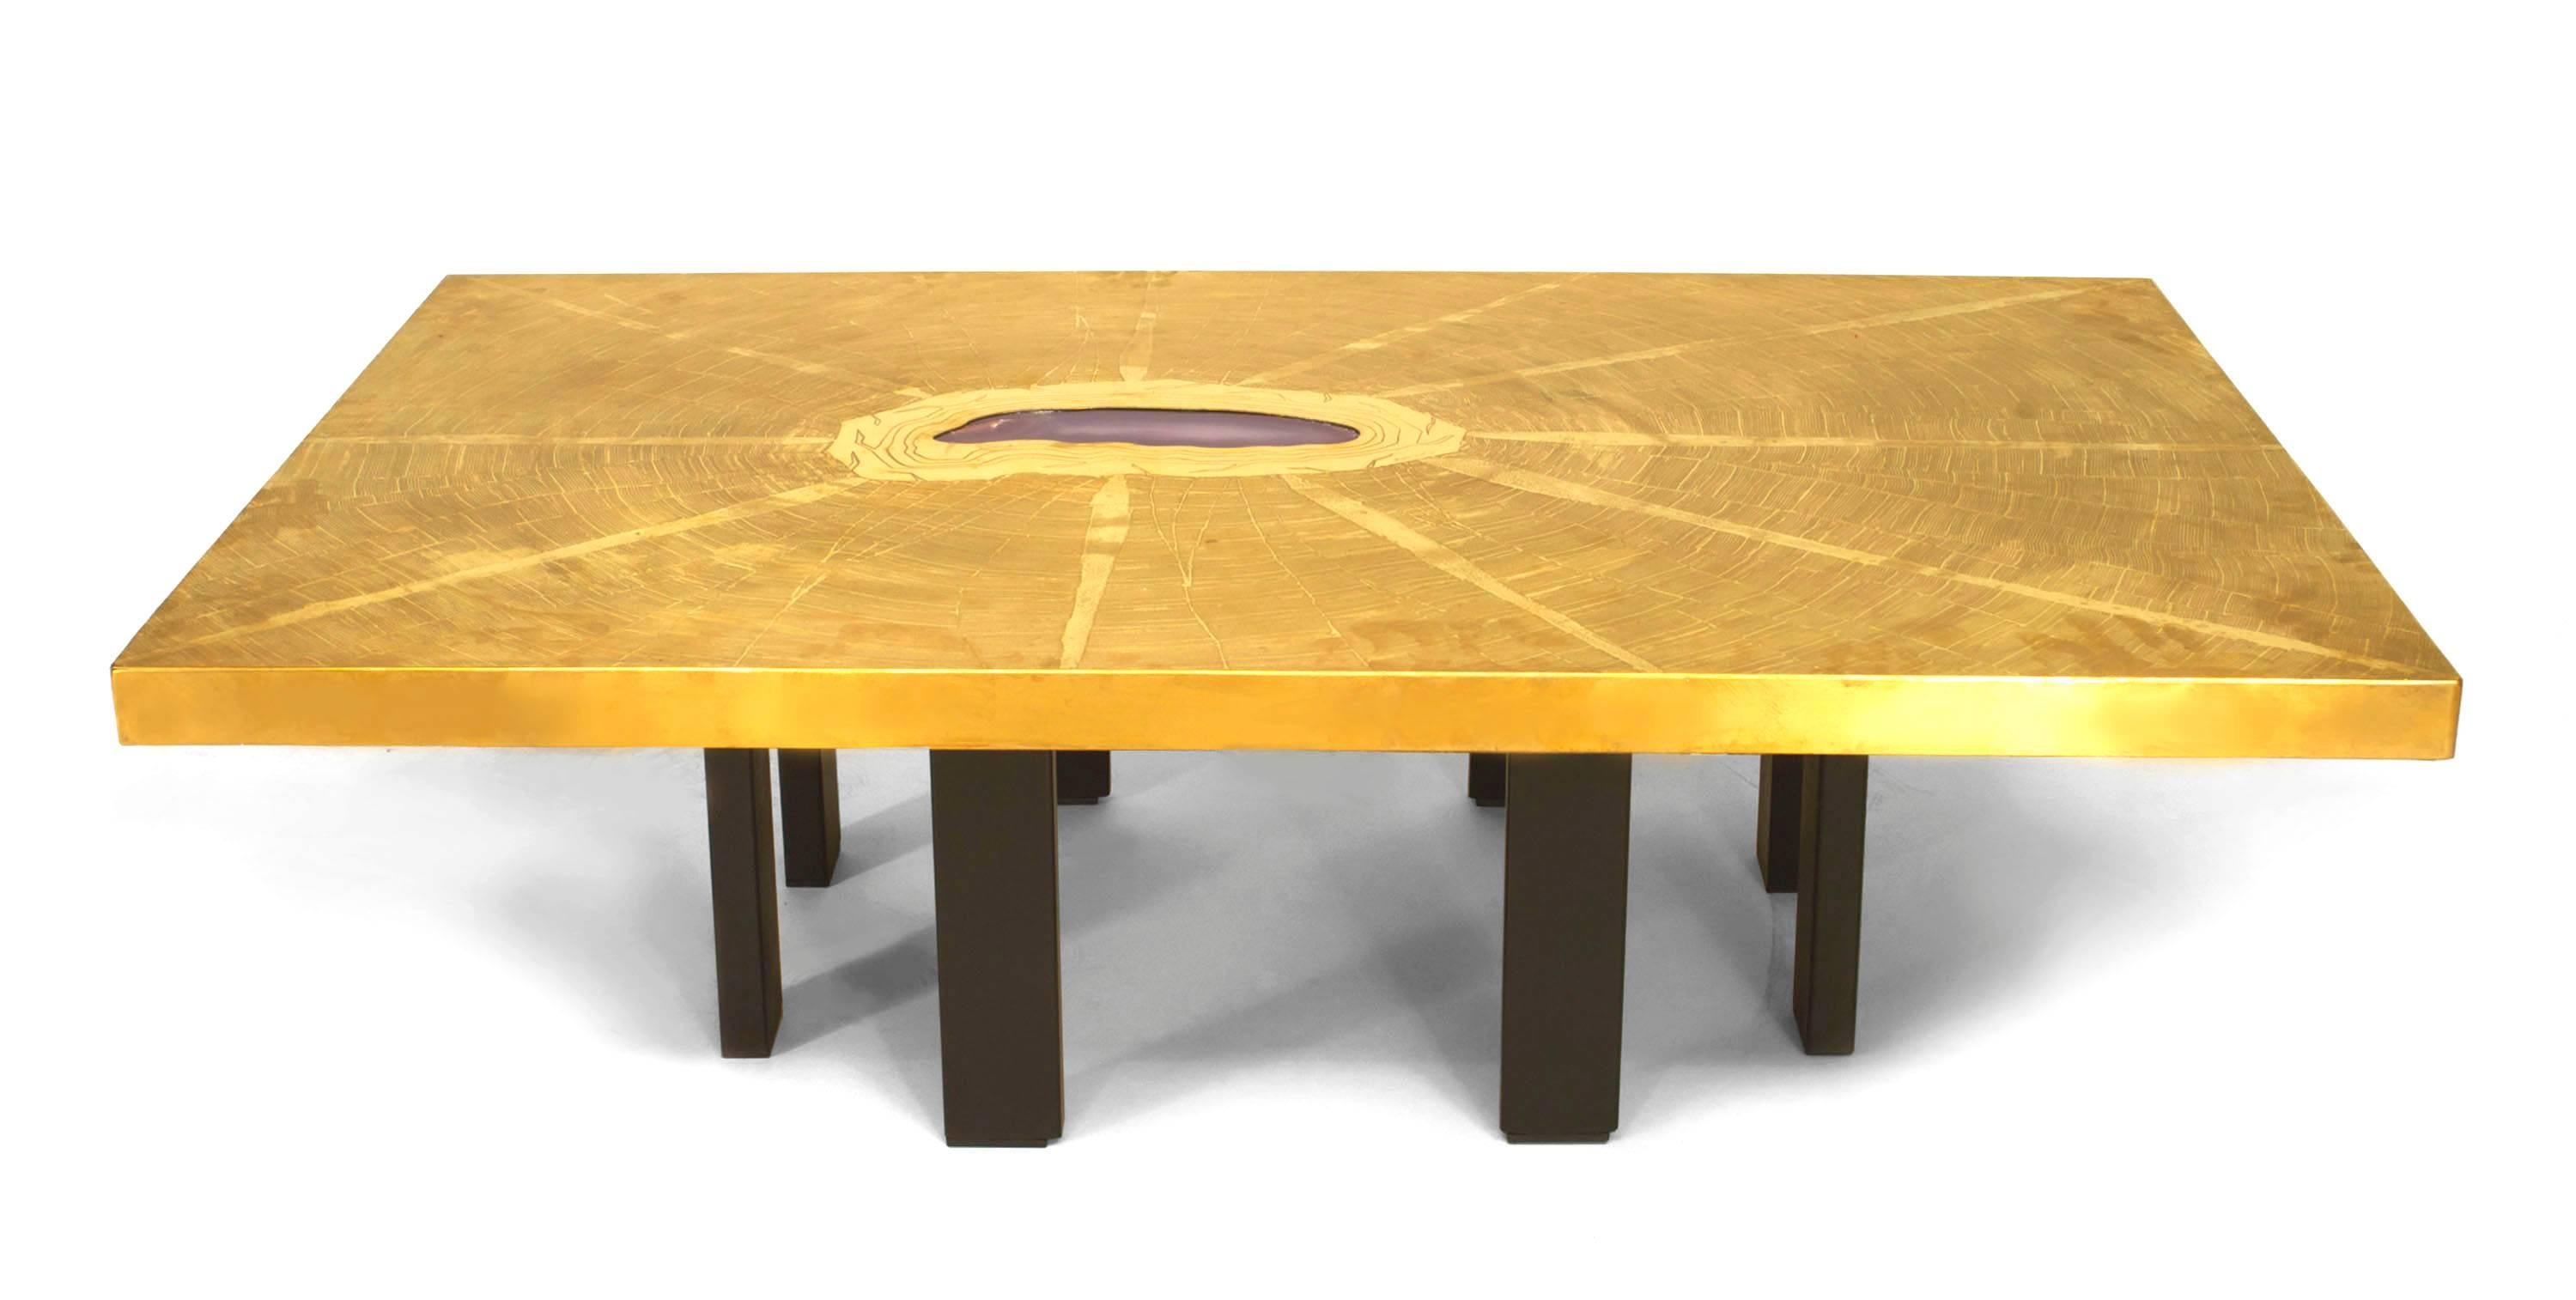 Dating to 1970's Belgium, this coffee table by Georges Mathias has a rectangular bronze top with an etched design radiating out from an inset agate center supported by a ring of rectangular ebonized legs.